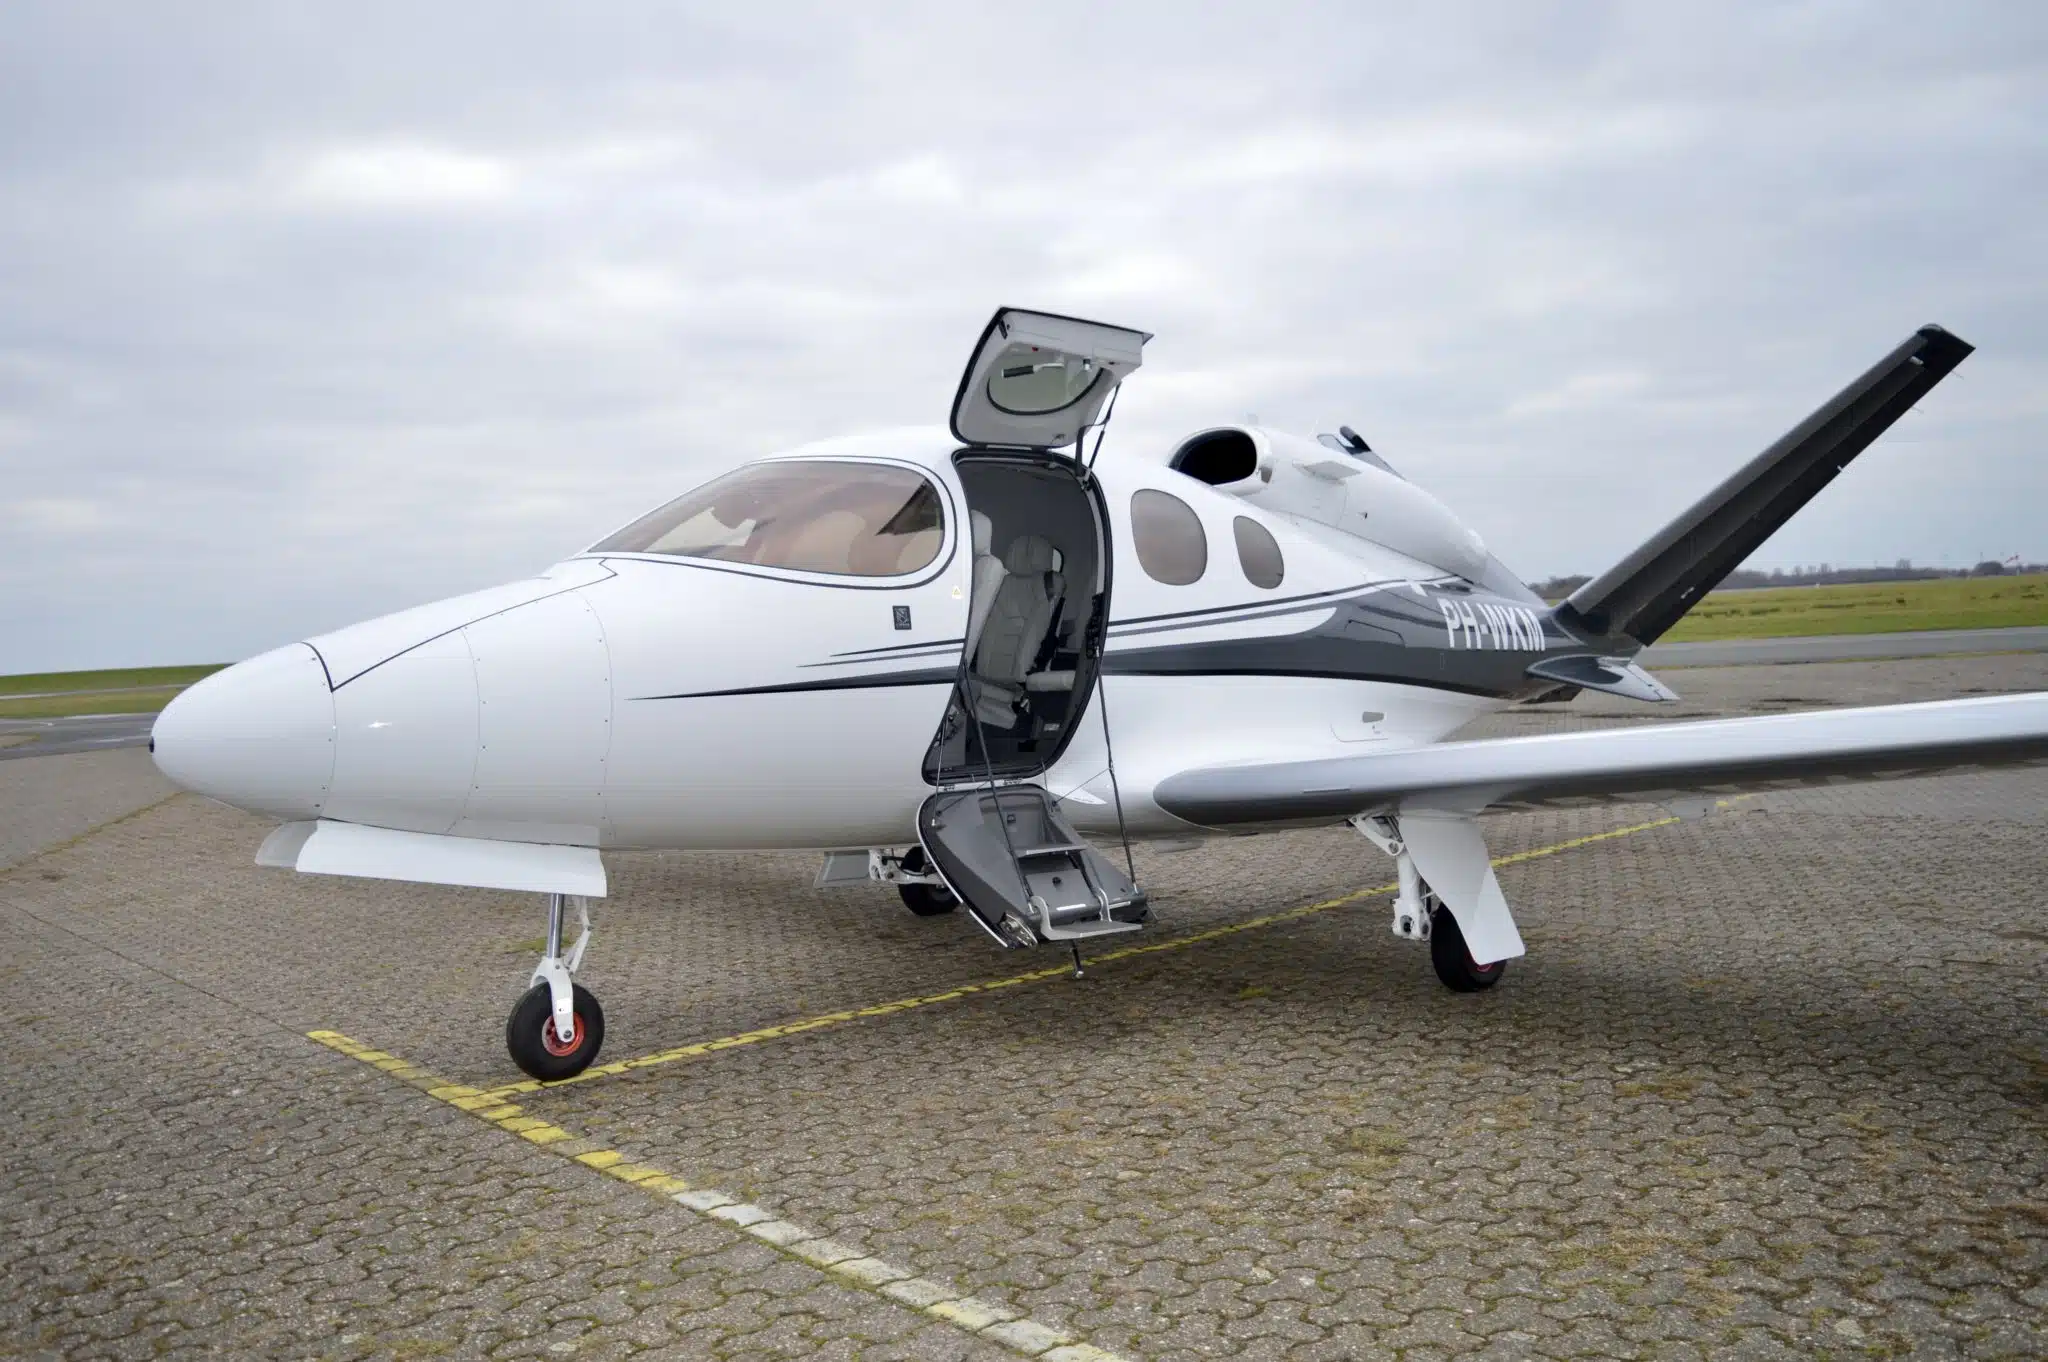 2018 Cirrus SF50 Visino Jet (PH-WKM) Private Jet For Sale on AvPay by Lone Mountain Aircraft.